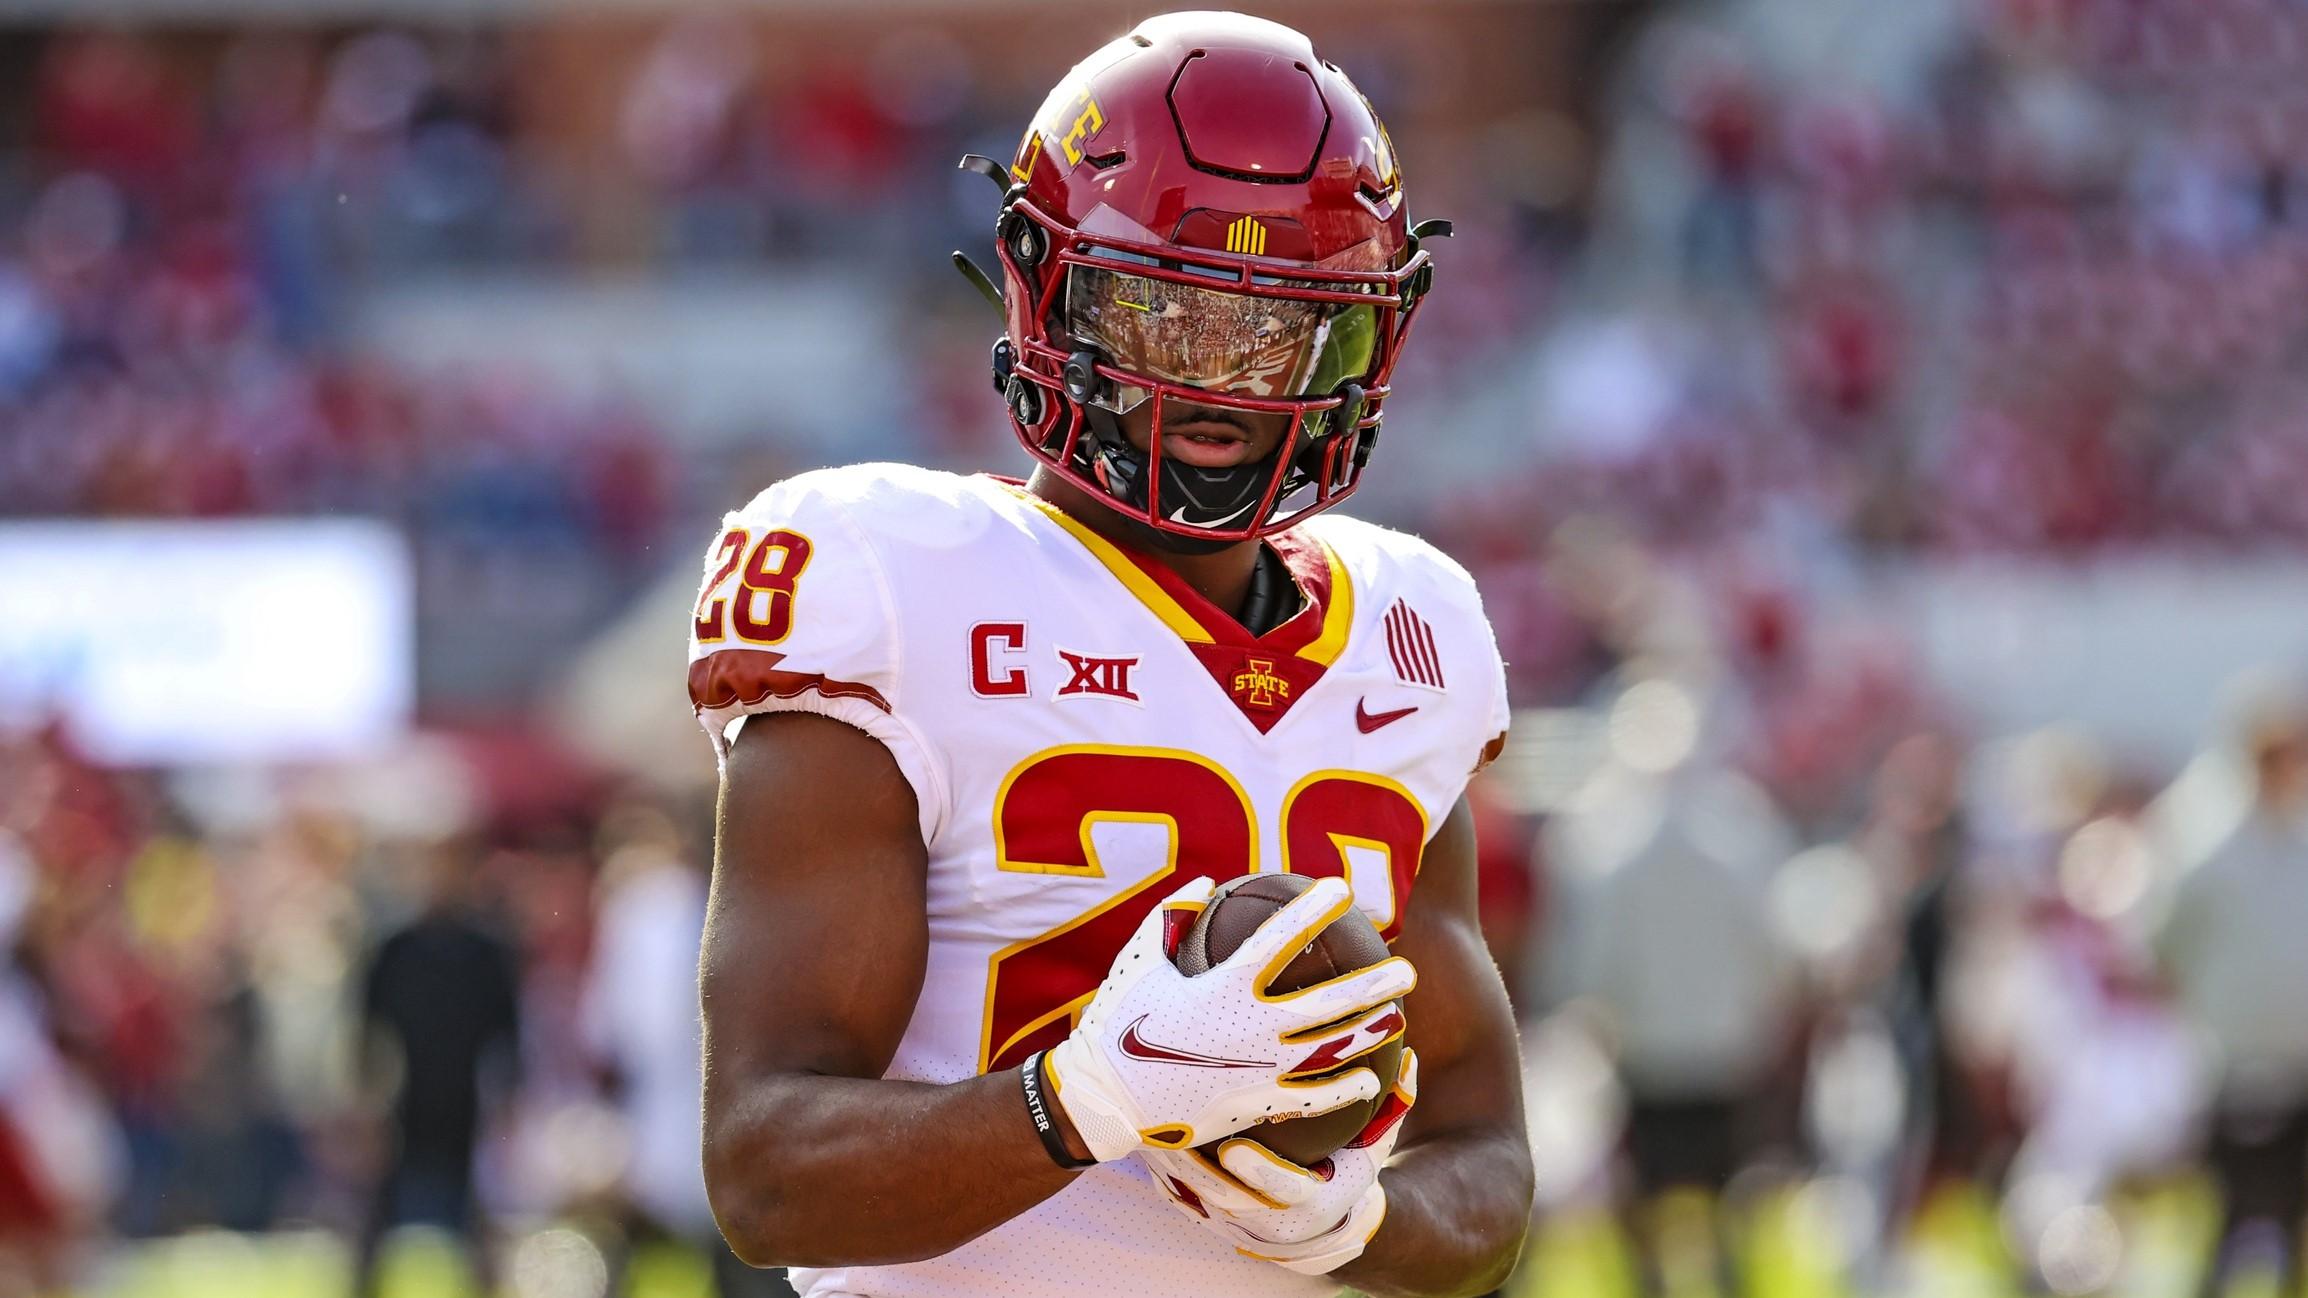 Nov 20, 2021; Norman, Oklahoma, USA; Iowa State Cyclones running back Breece Hall (28) warms up before the game against the Oklahoma Sooners at Gaylord Family-Oklahoma Memorial Stadium. / Kevin Jairaj-USA TODAY Sports